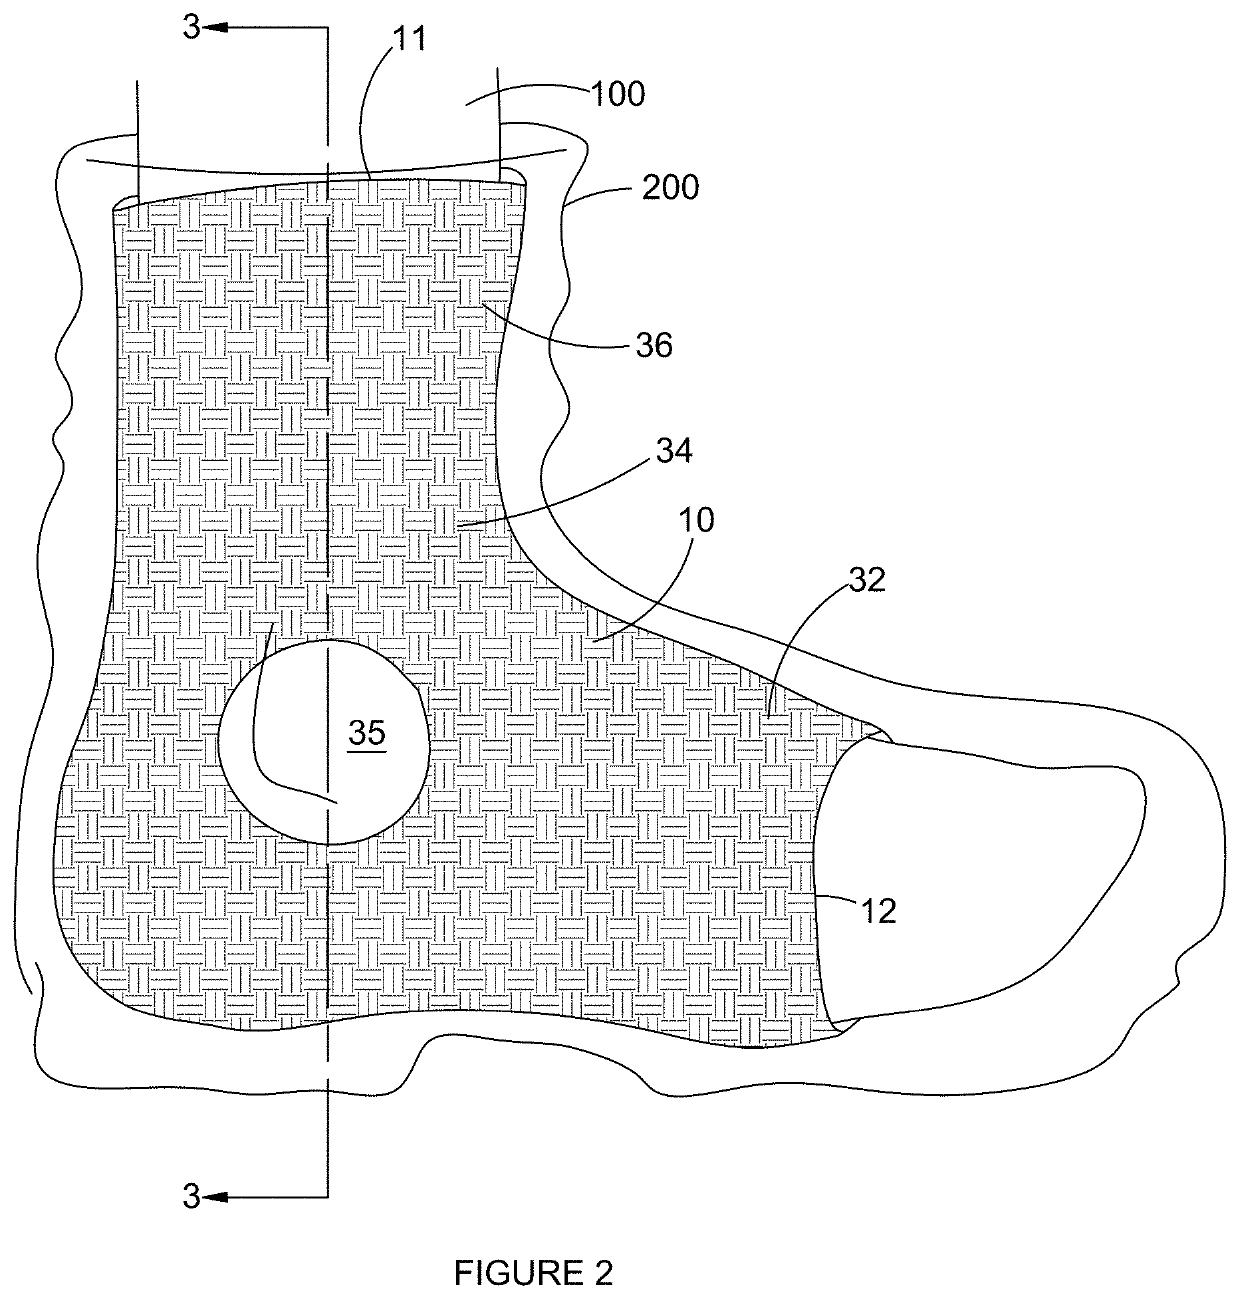 Distributive Foot Sleeve for Relieving Pressure in a Ski Boots and the Like